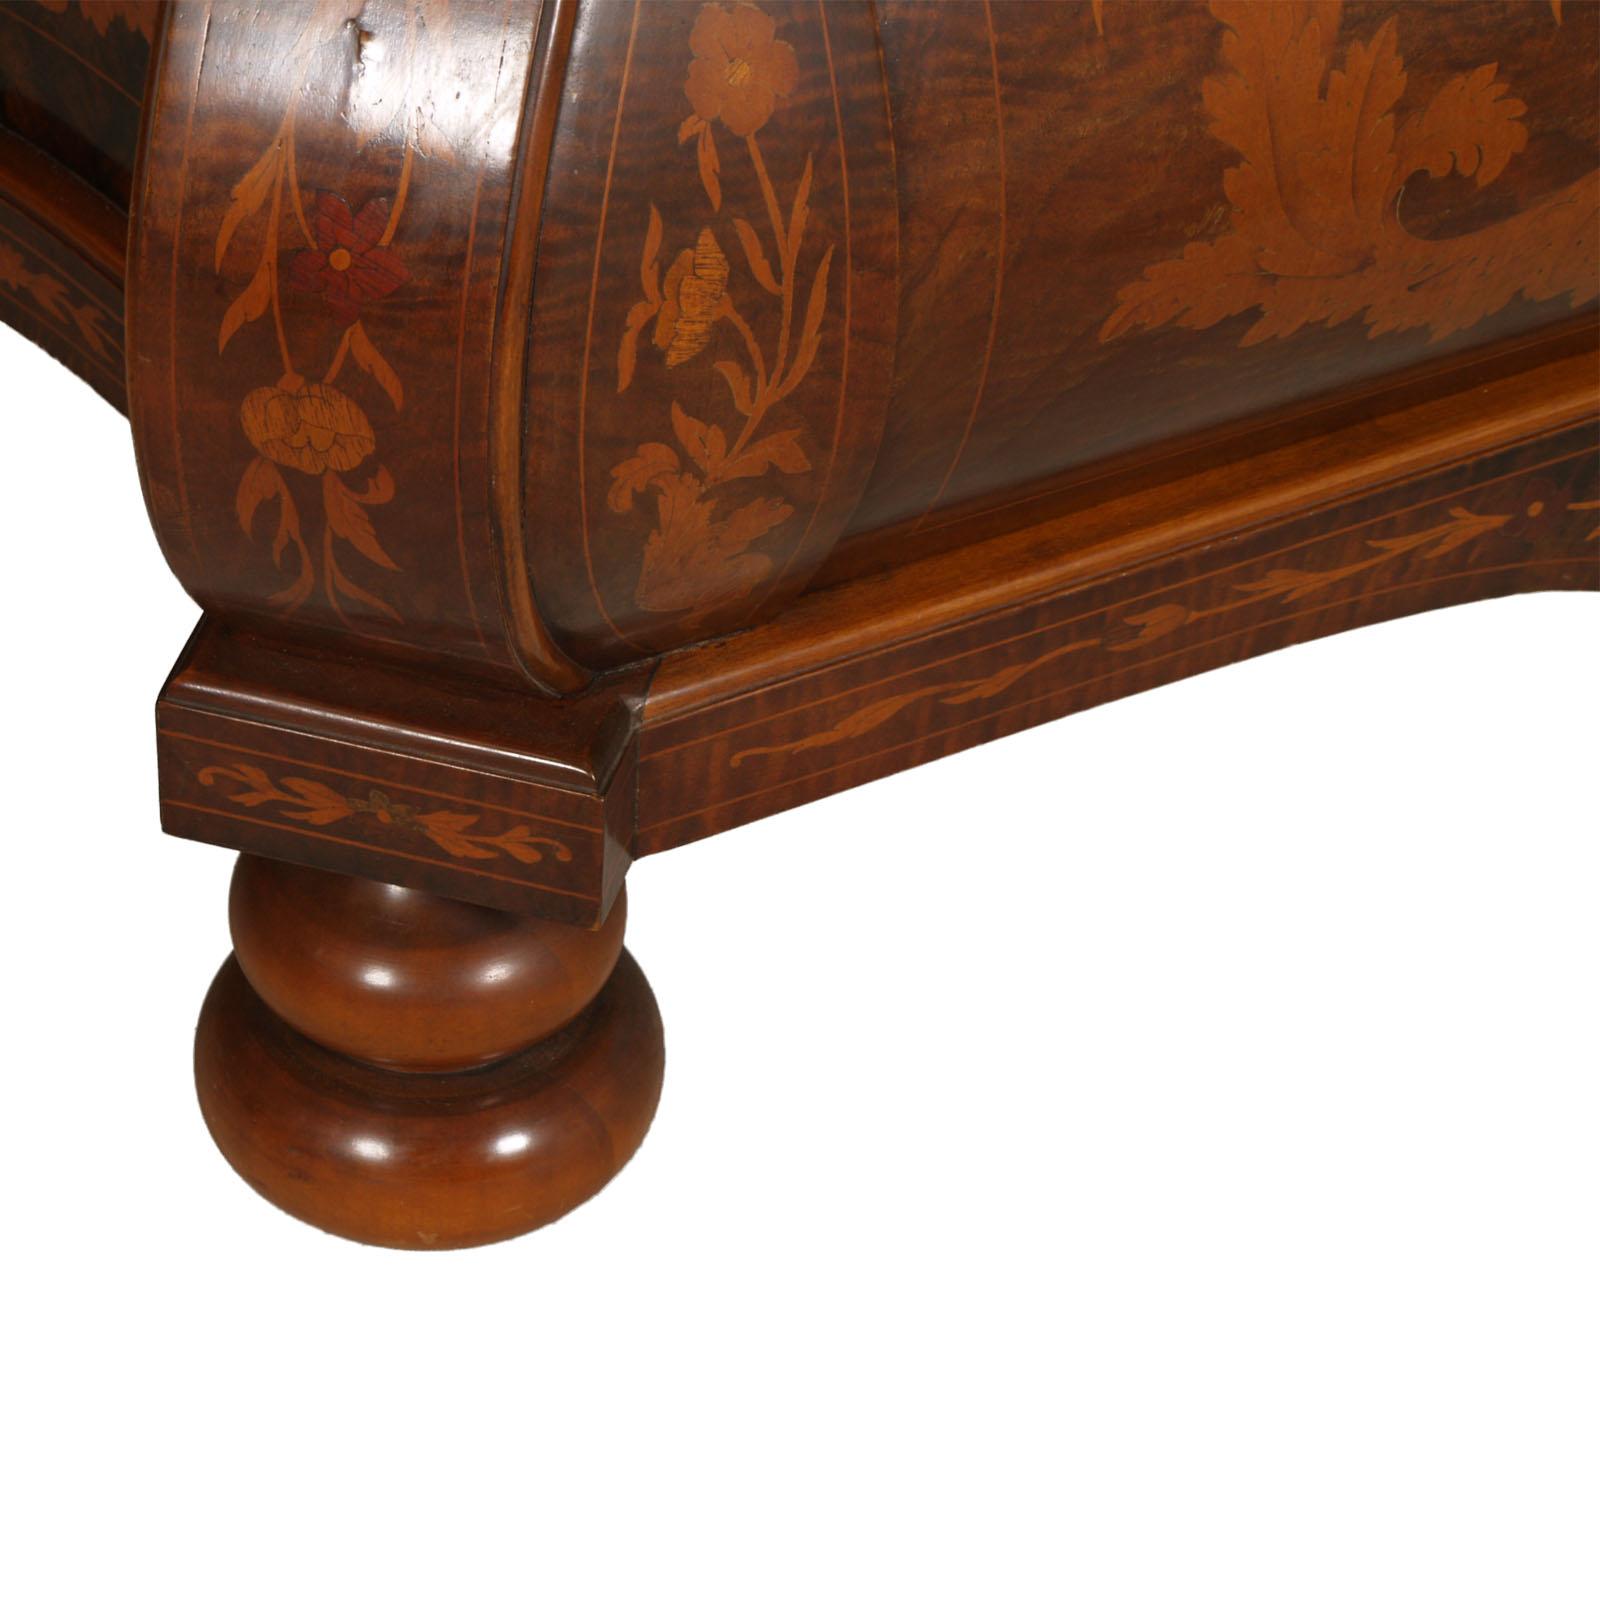 1930s Venetian Walnut Baroque Sideboard and Display Cabinet Richly Floral Inlaid For Sale 4